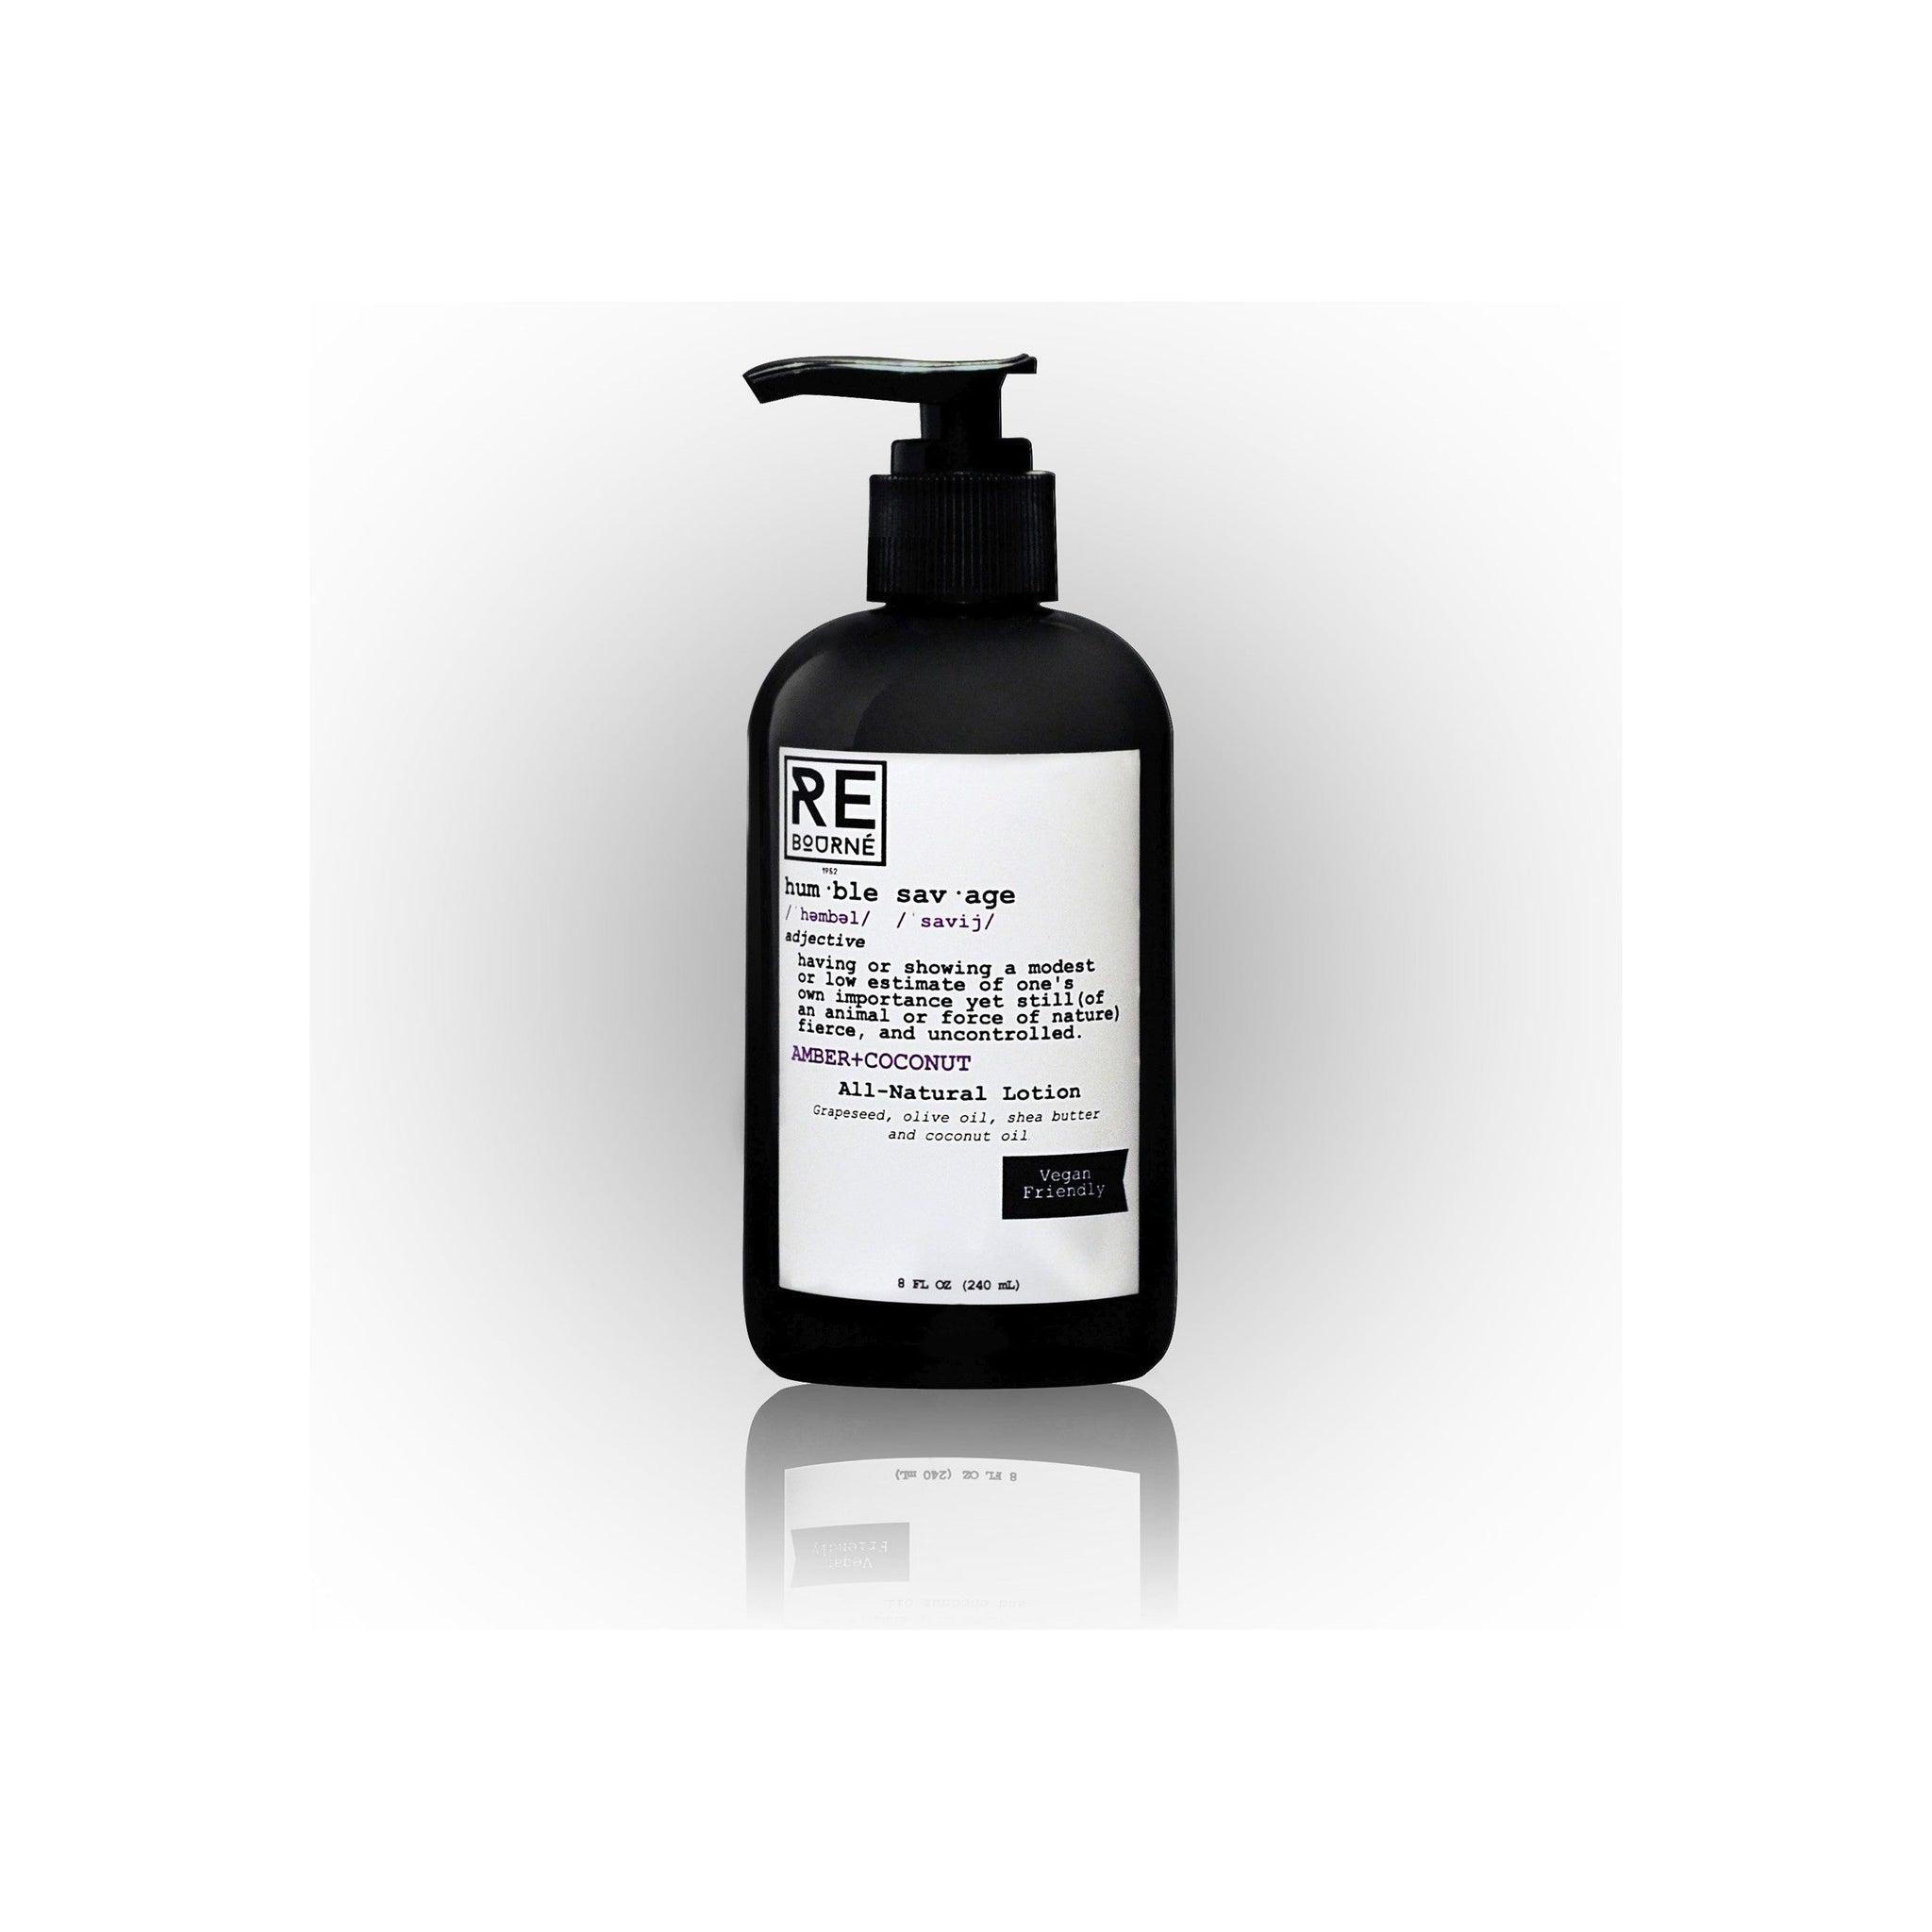 AMBER + COCONUT Natural Body Lotion "Humble Savage" - Rebourne Black bottle with white background